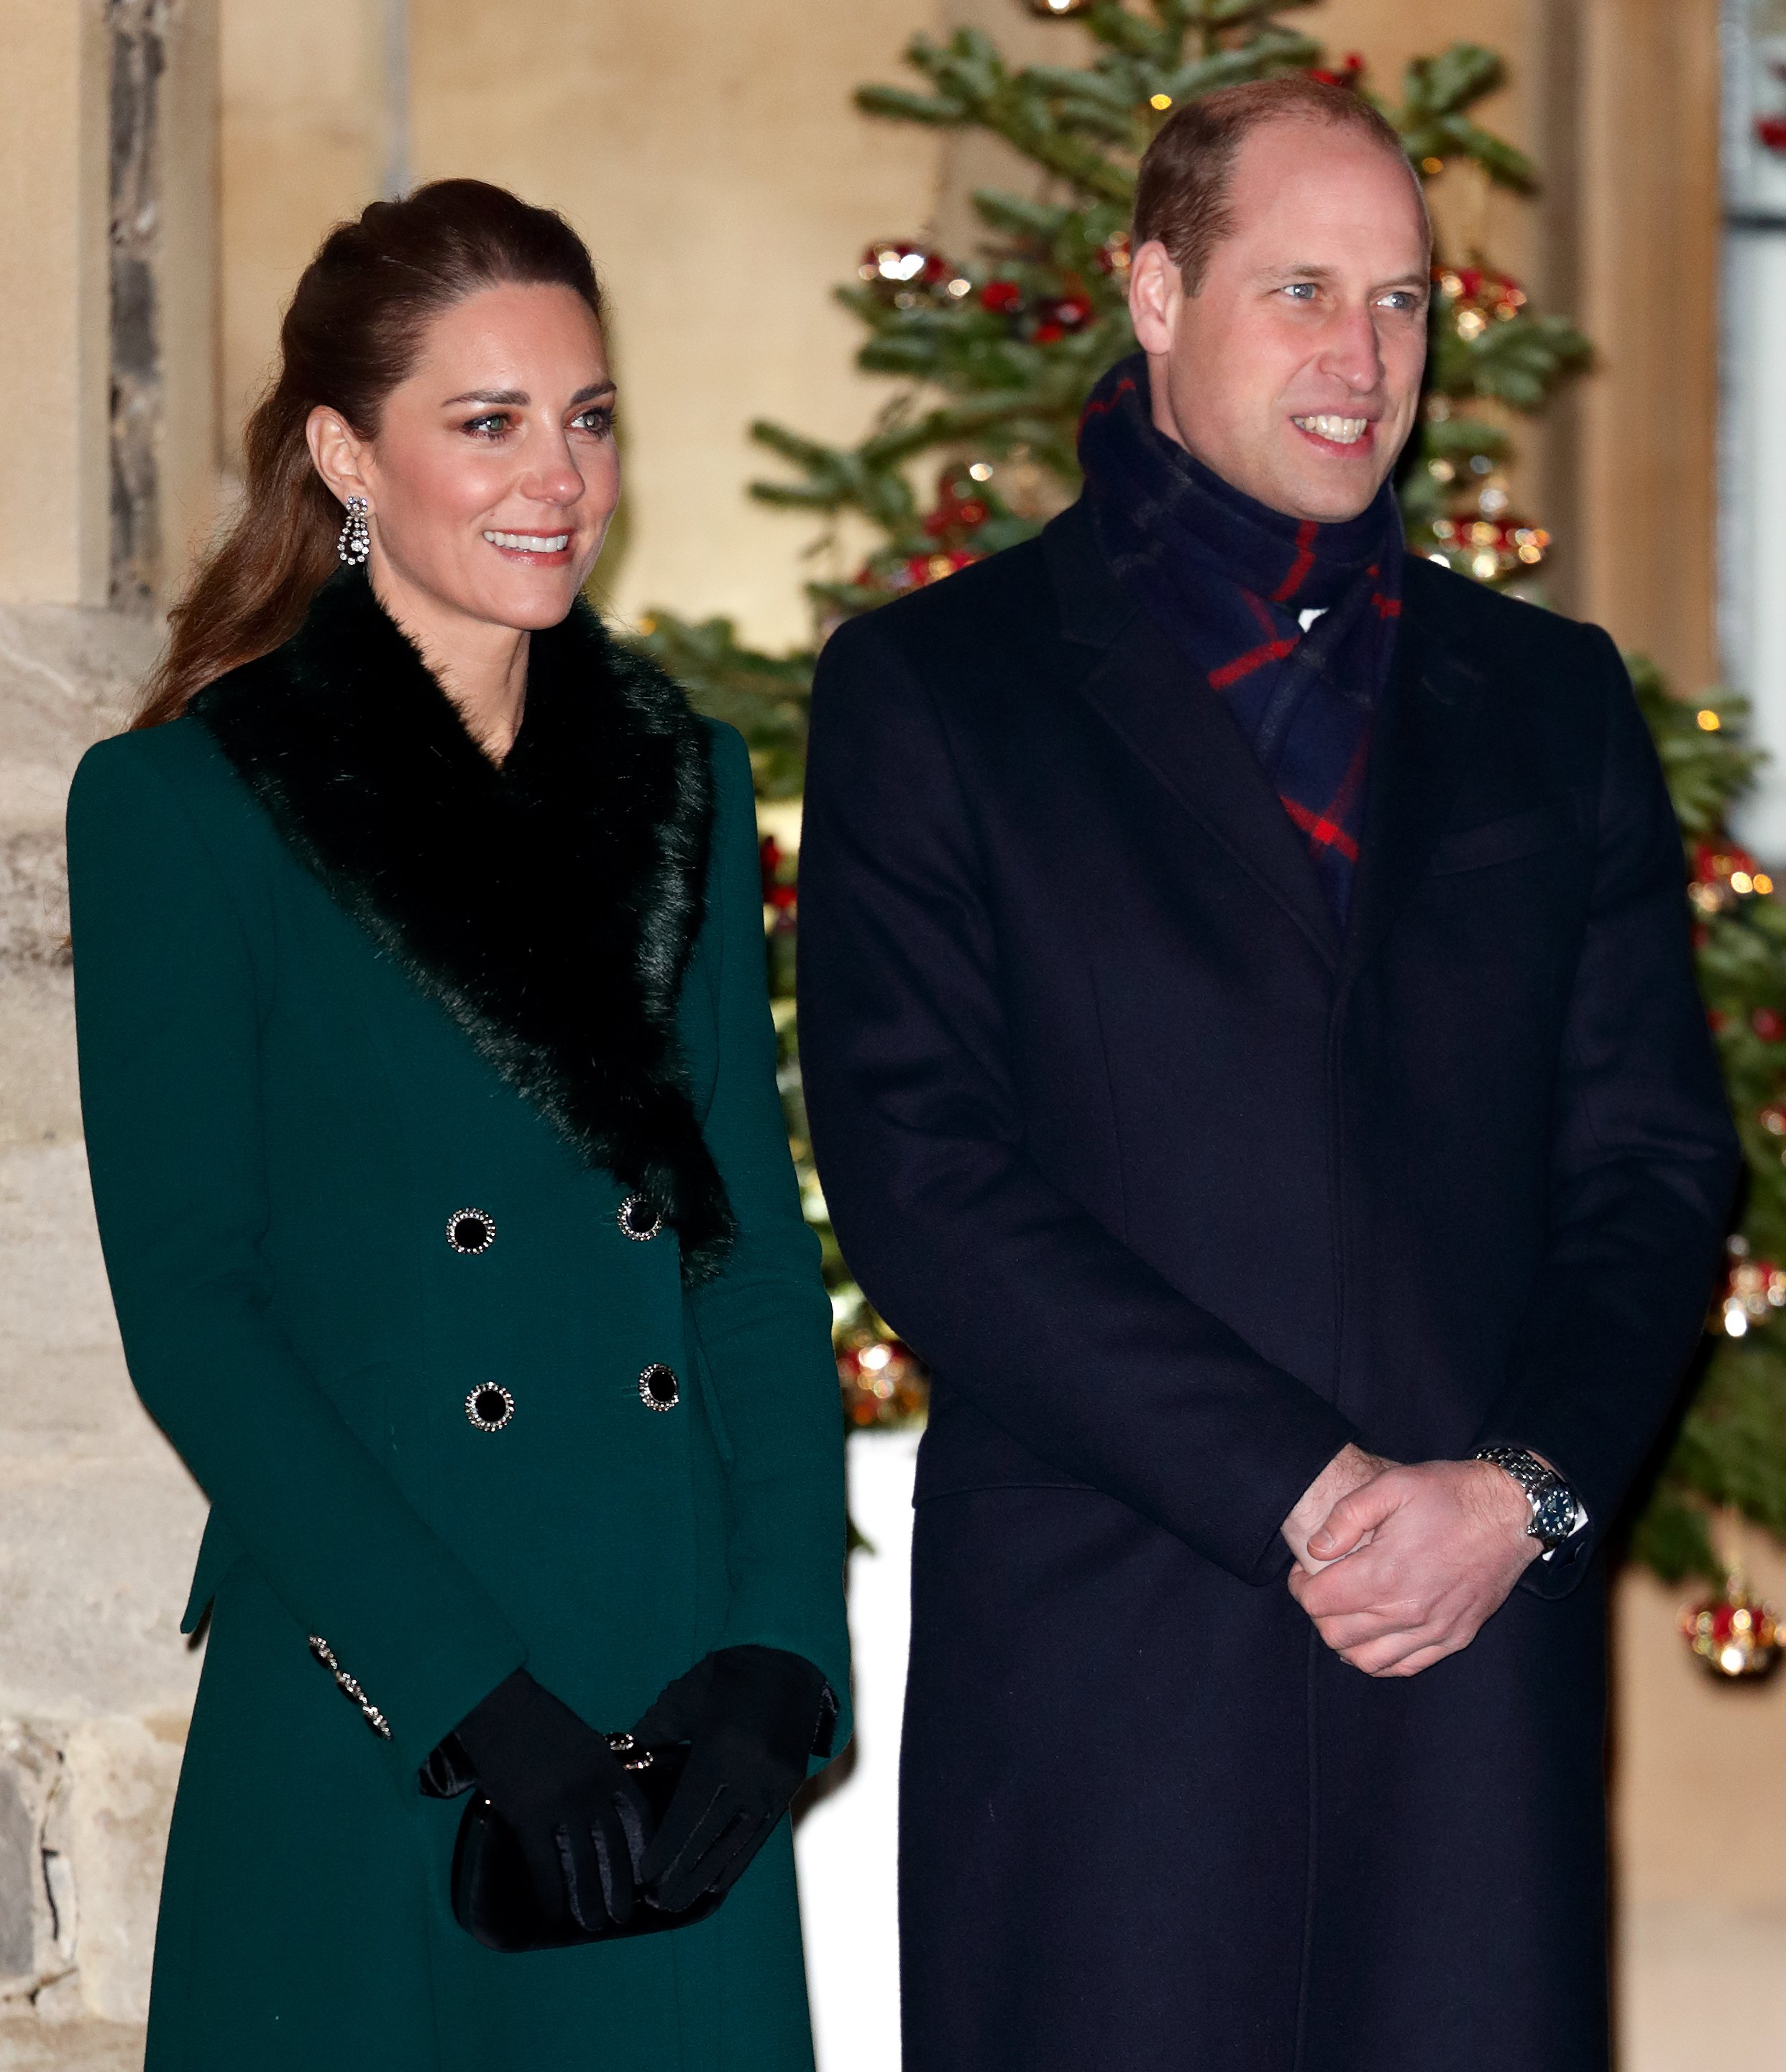 The Duke and Duchess of Cambridge preparing to thank essential workers at an event at Windsor Castle, December, 2020. | Photo: Getty Images.